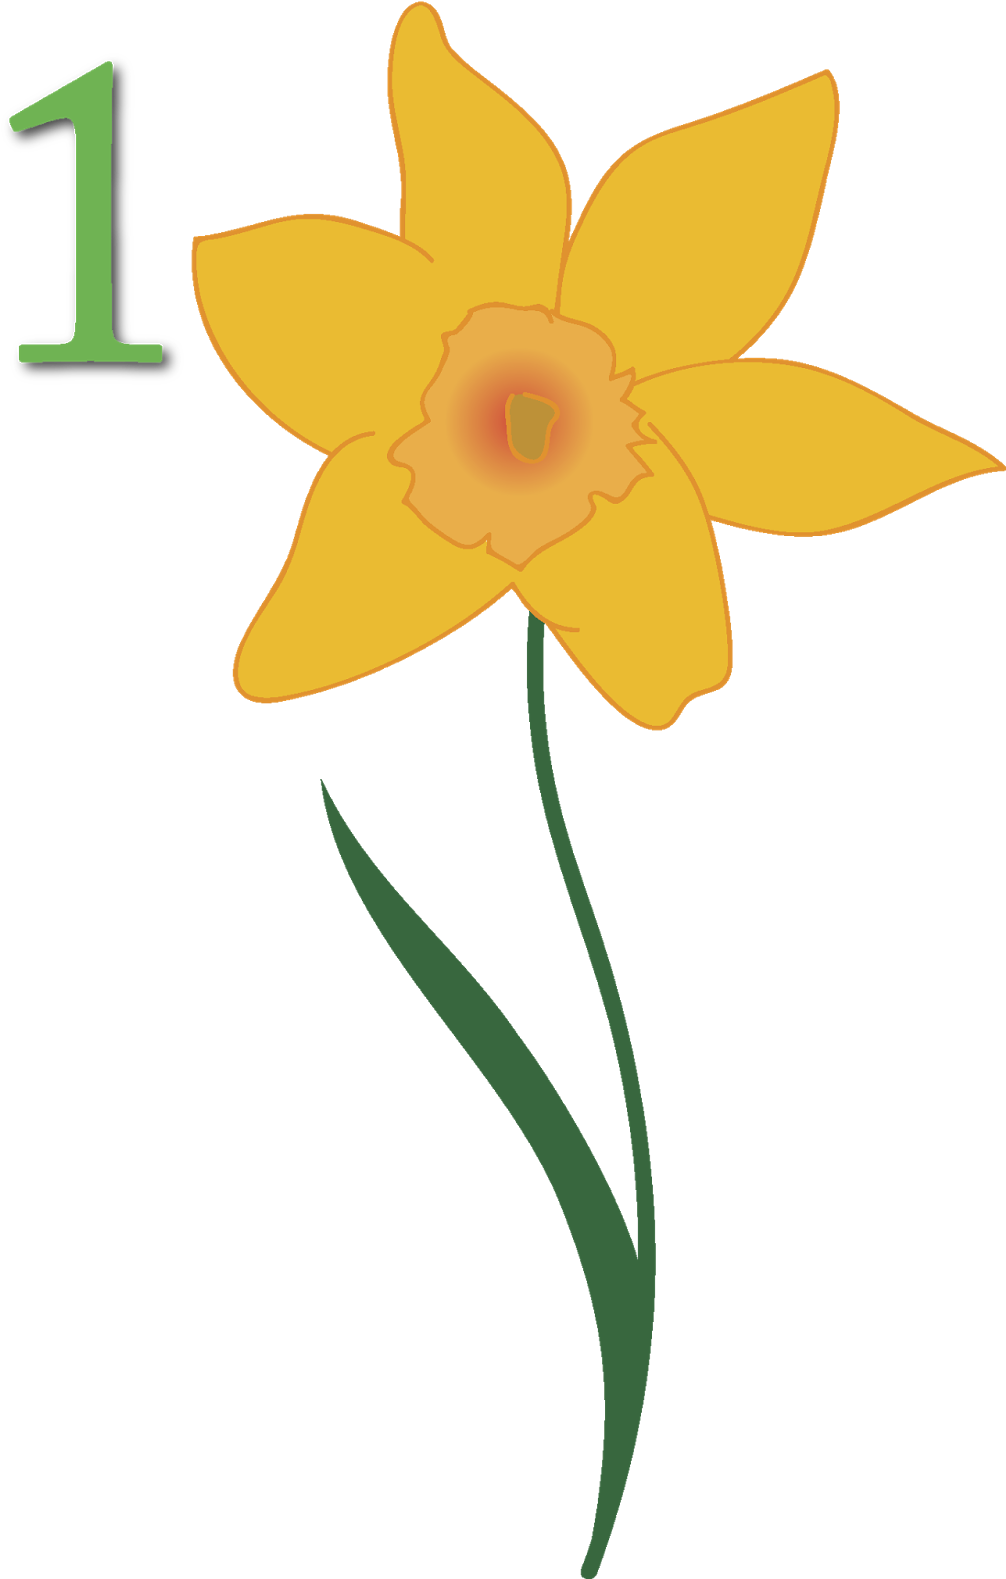 A Yellow Flower With Green Stems